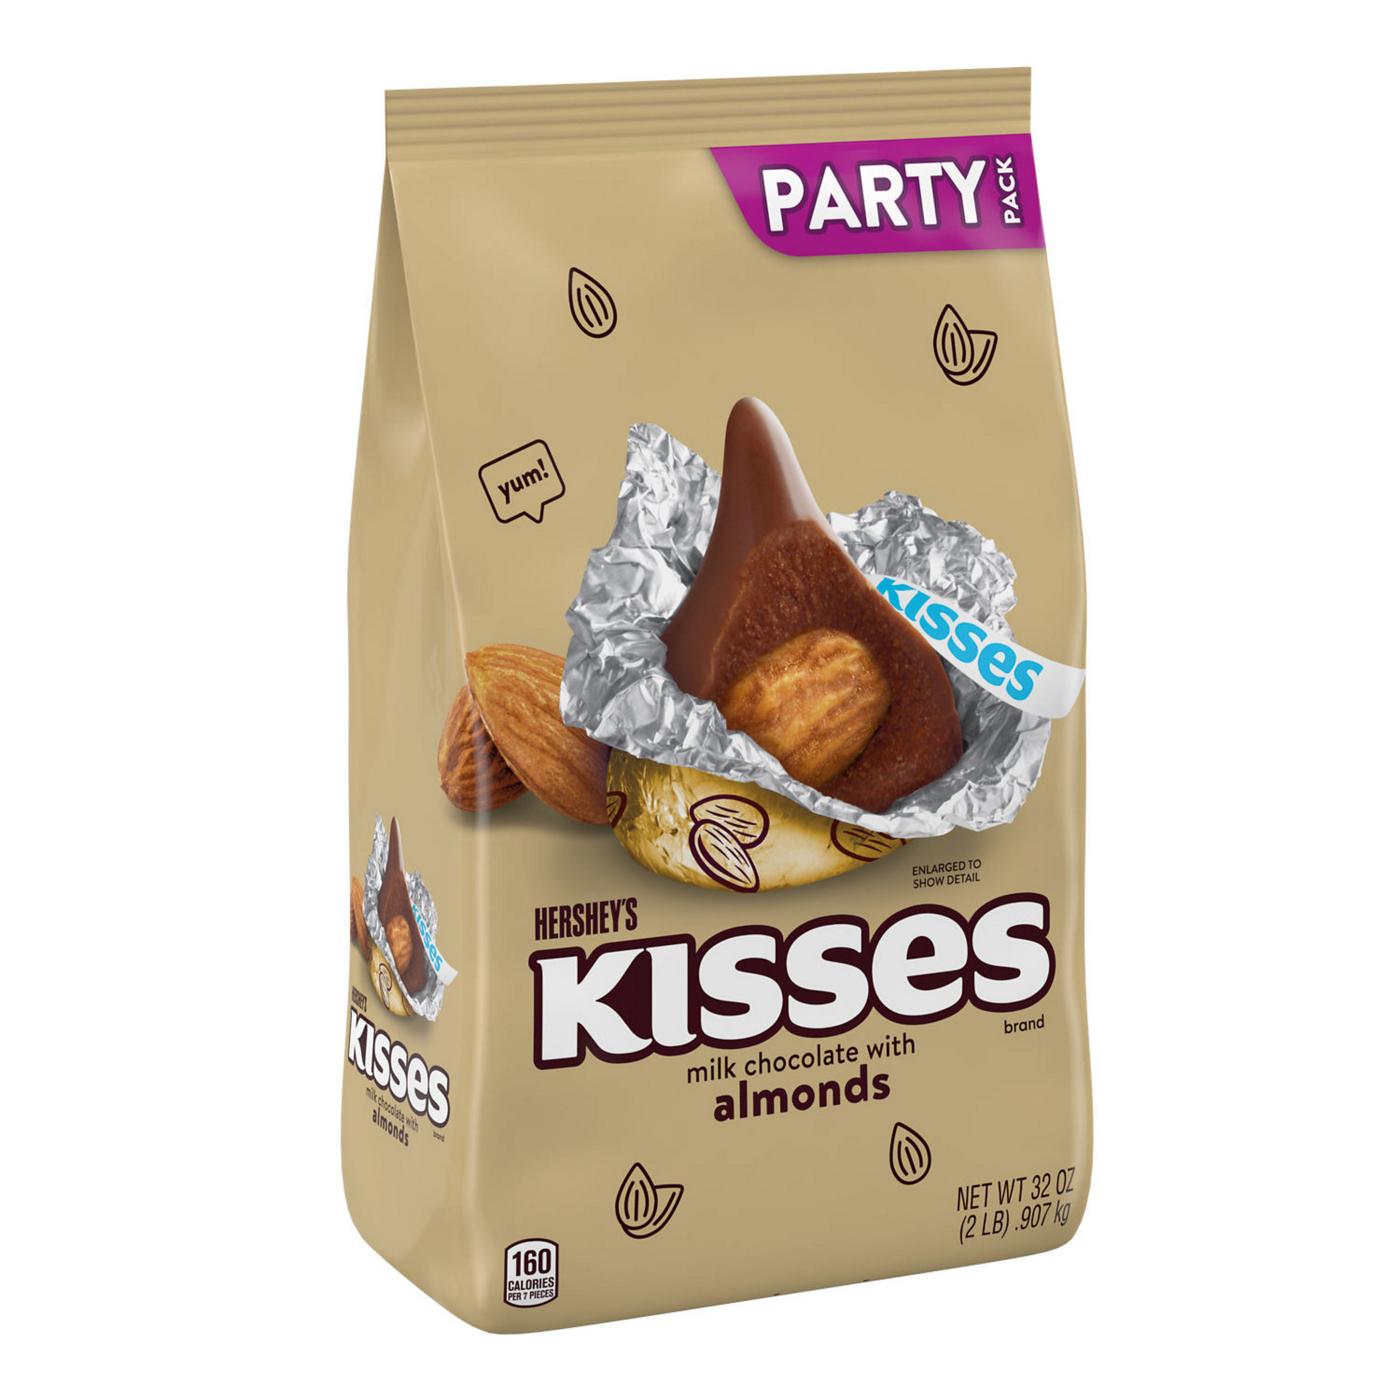 Hershey's Kisses Milk Chocolate with Almonds Candy - Party Pack; image 6 of 7